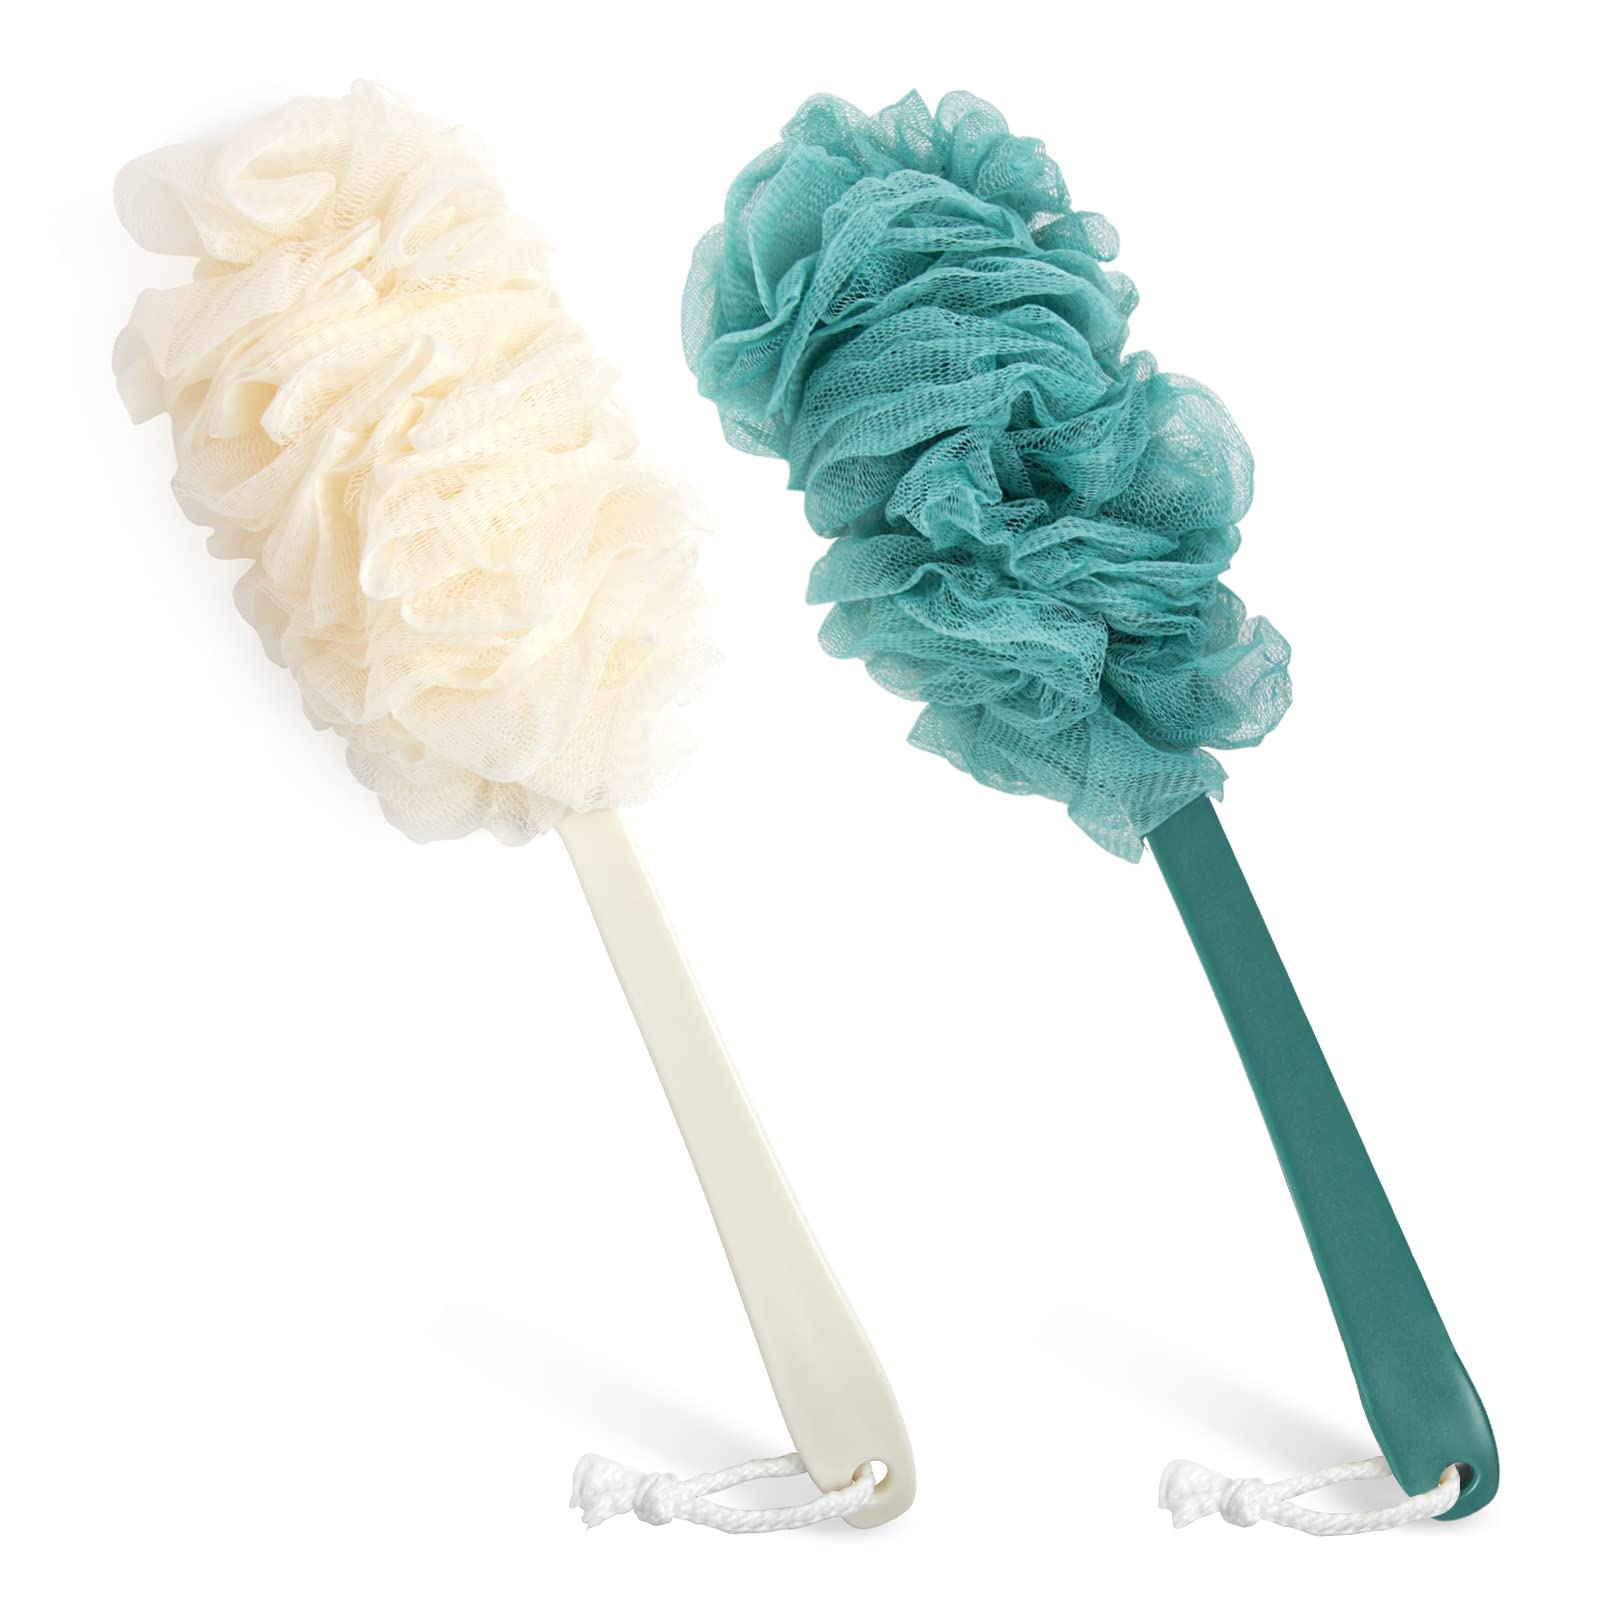 2Pack Back Scrubber for Shower，PIPUHA Loofah Sponge Shower Brush Using Body Exfoliating with Long Handle, Loofah on a Stick for Men Women, Bathing Accessories for Body Brushes (Blue and White)